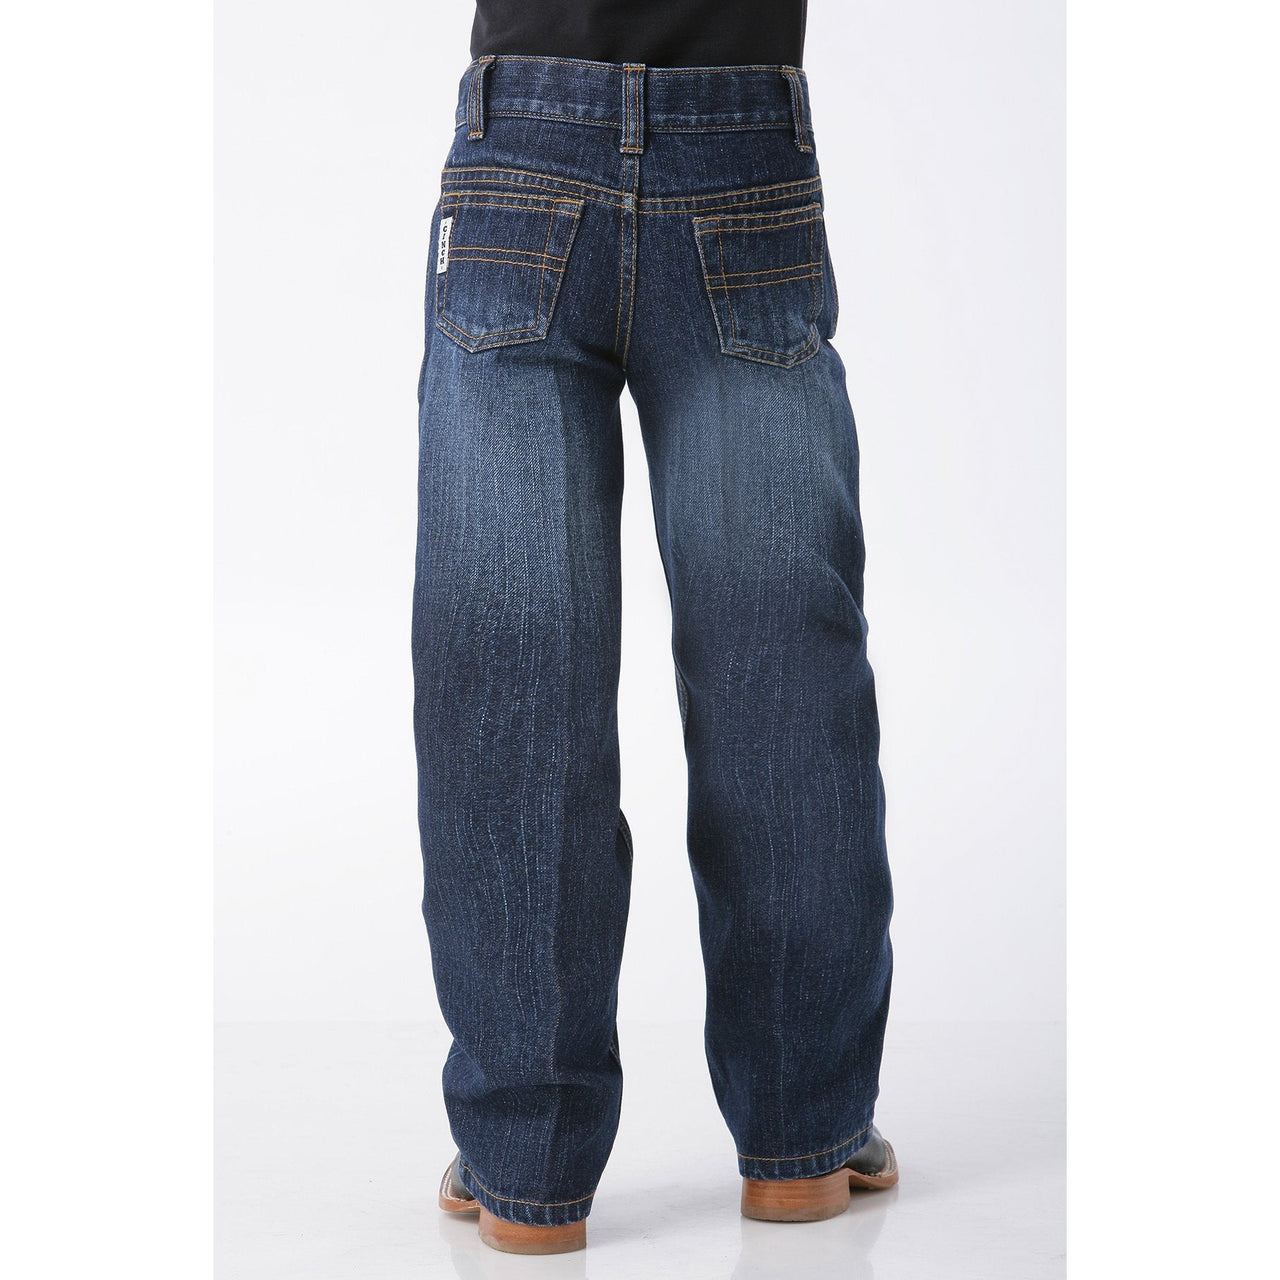 Cinch Mens Relaxed Fit White Label Jeans - Dark Stonewash